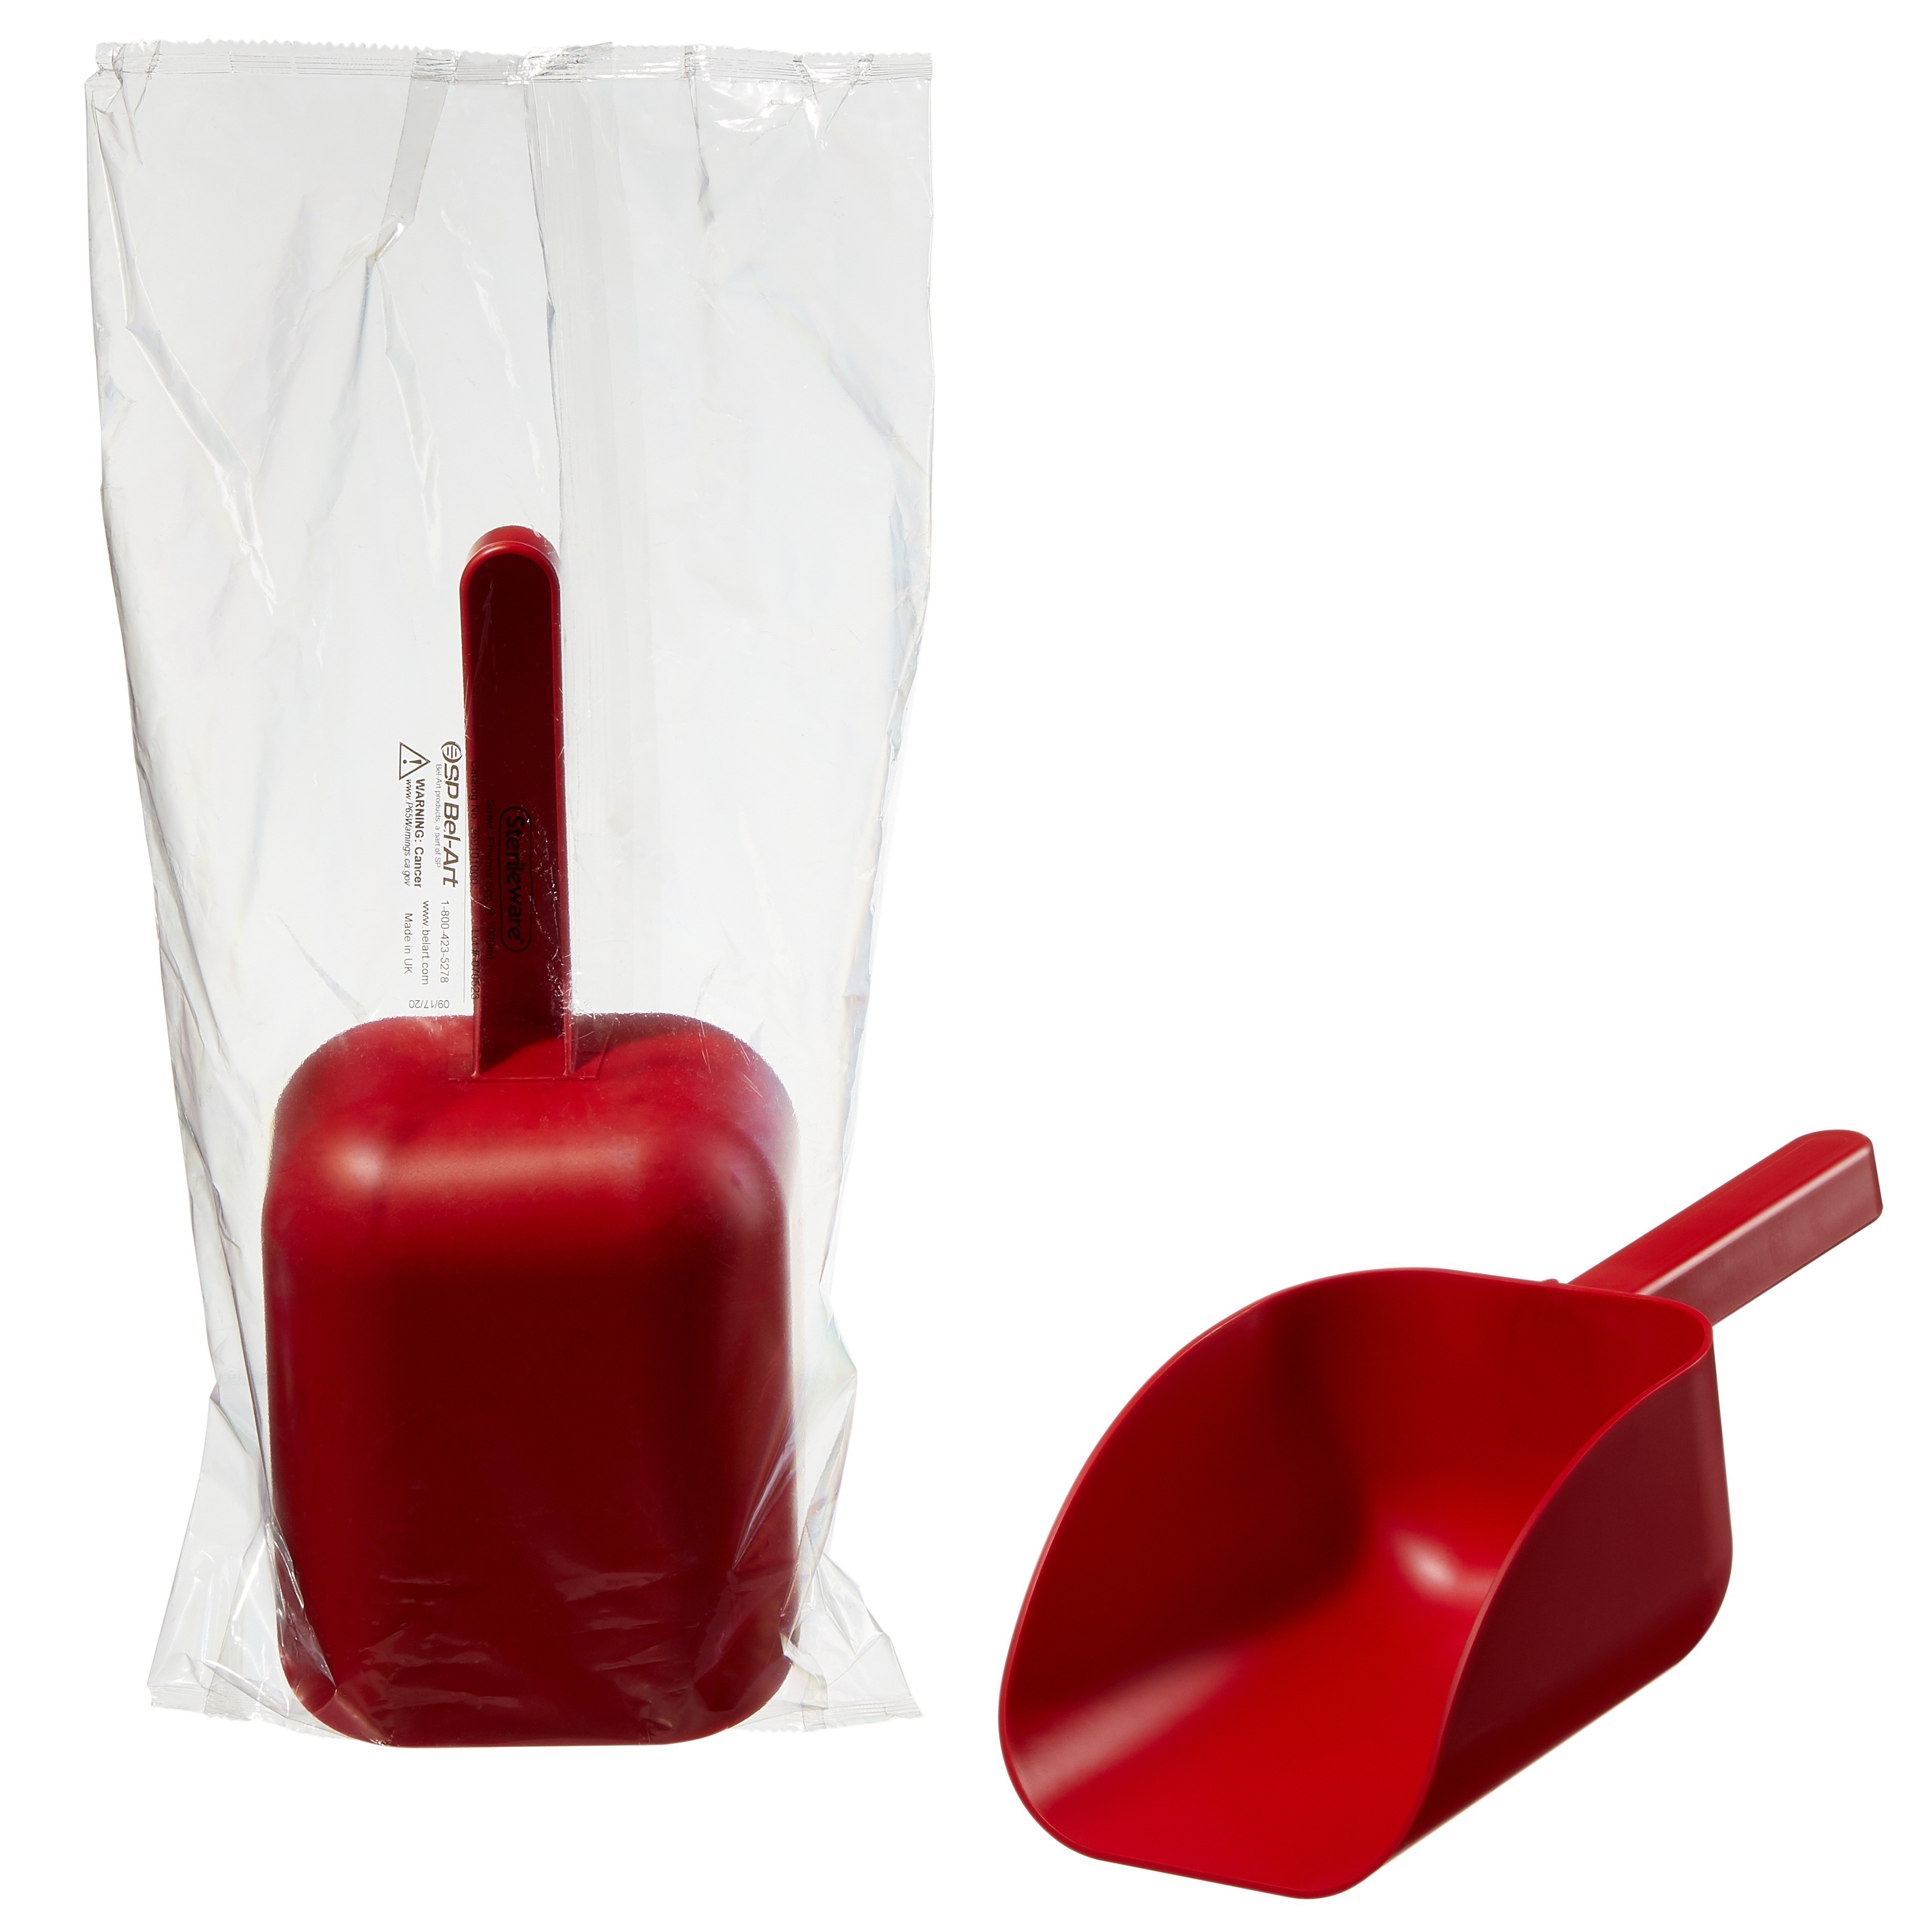 Sterileware Pharma Scoops - Red; 1000ml (34oz), Individually Wrapped (Pack of 25)